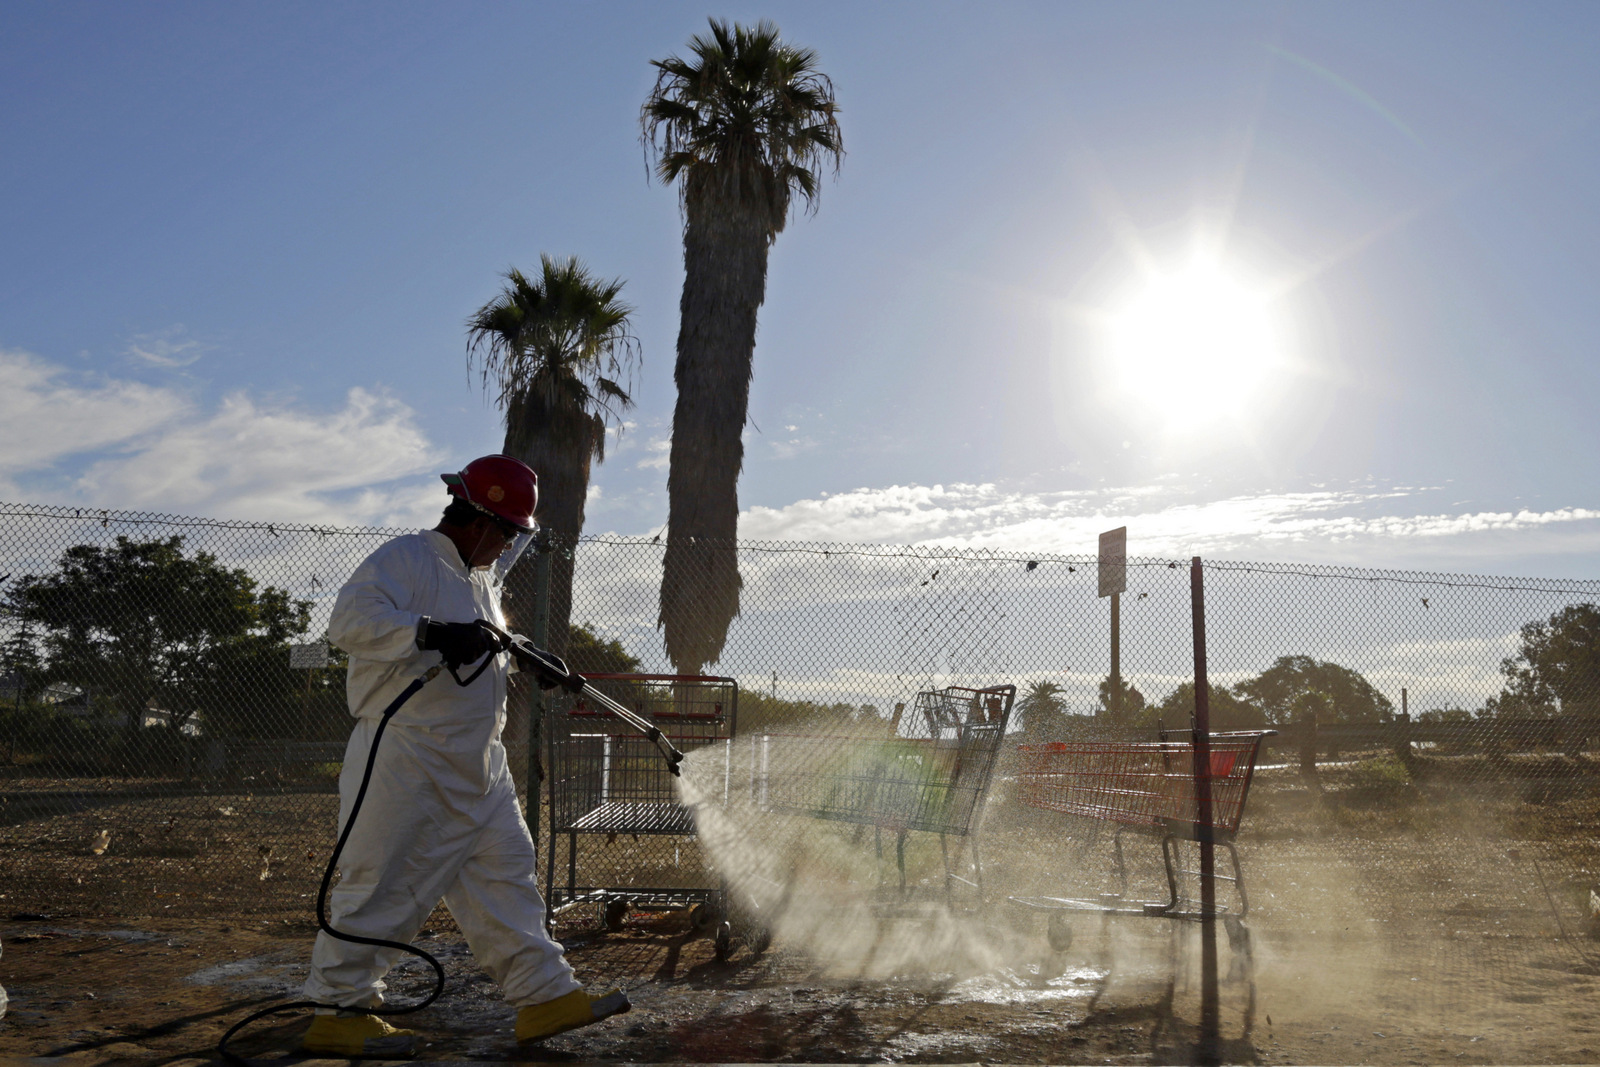 A worker sprays a bleach solution on a sidewalk in downtown San Diego as part of an effort to control a deadly hepatitis A outbreak. The increased number of hepatitis cases in the homeless population, and the geographic spread of the disease led California to declare a state of emergency in October. Gregory Bull | AP